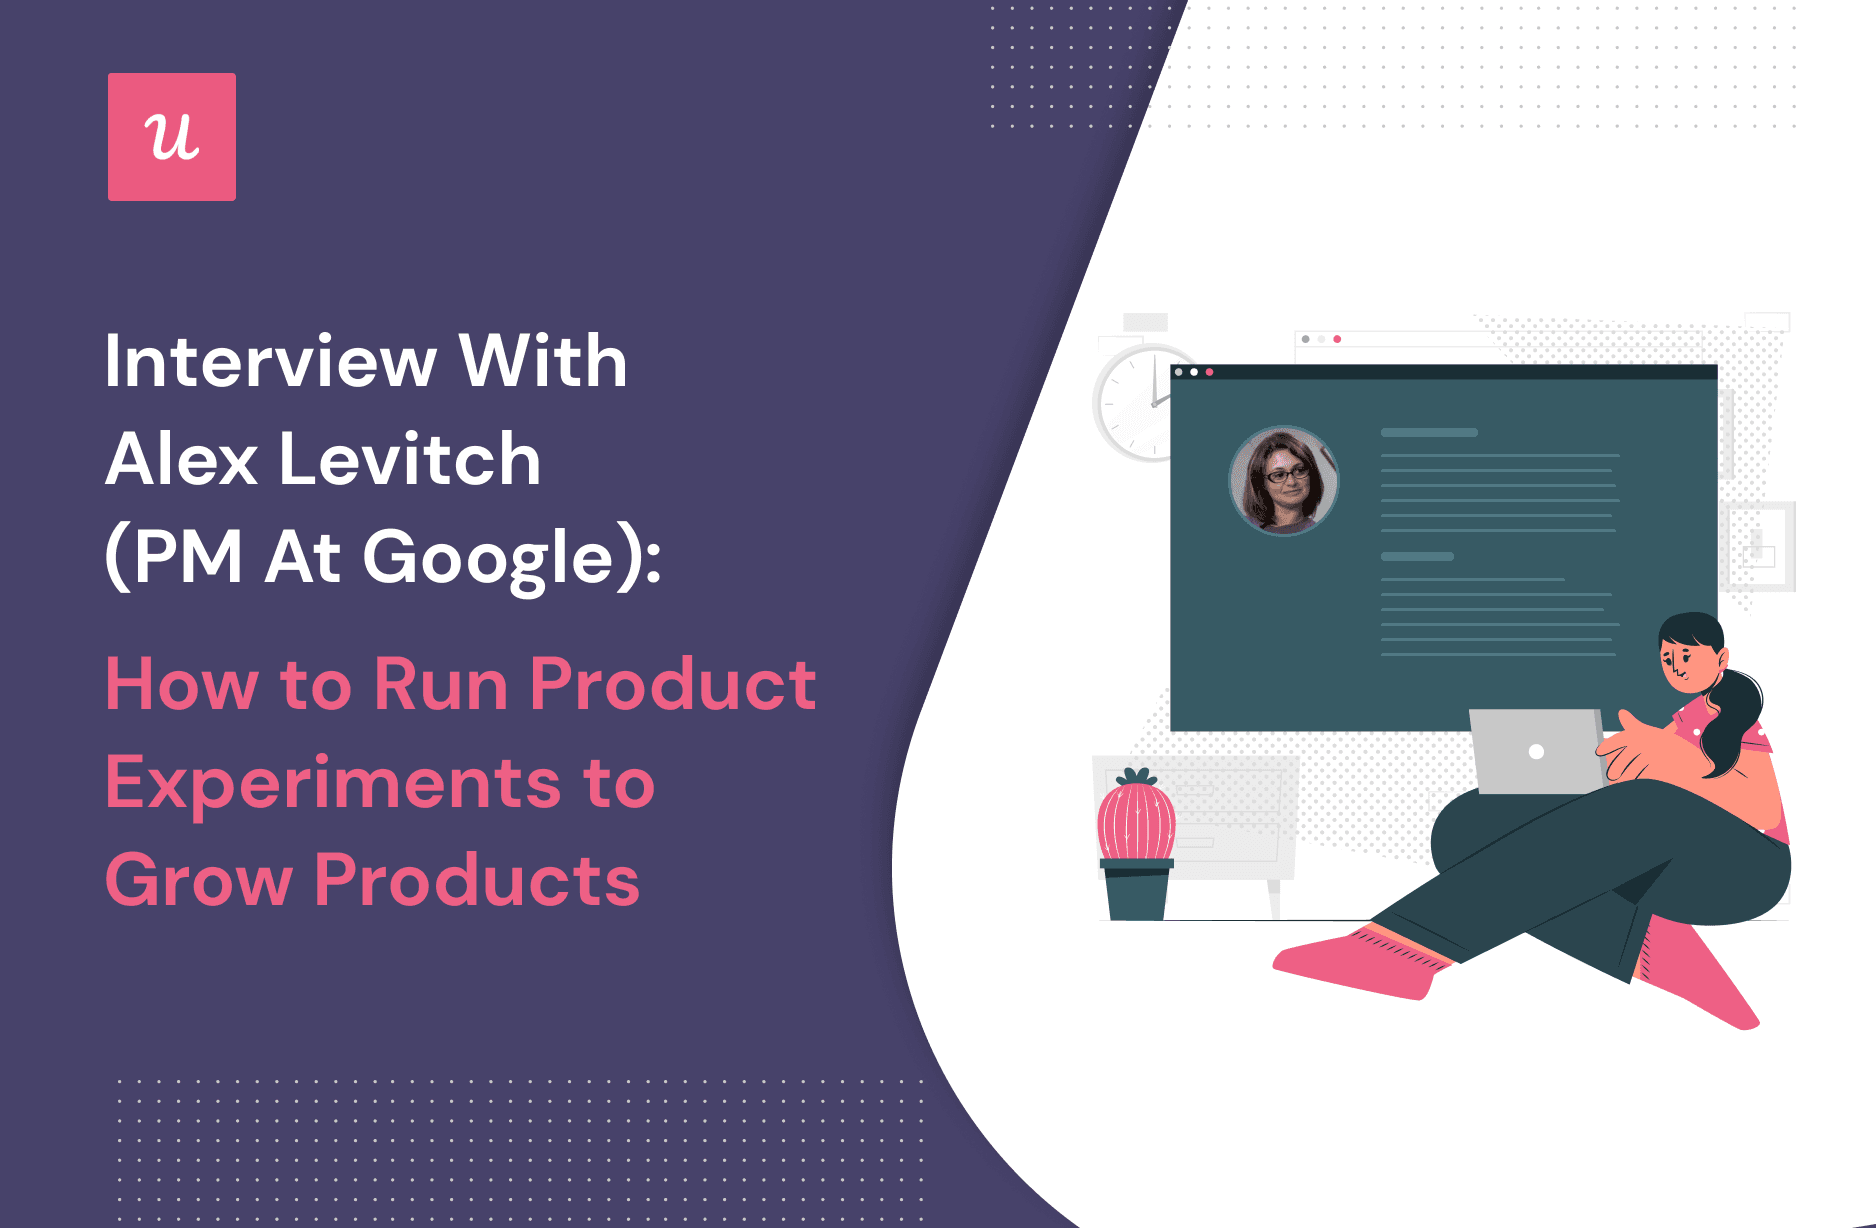 Interview With Alex Levitch (PM at Google): How to Run Product Experiments to Grow Products